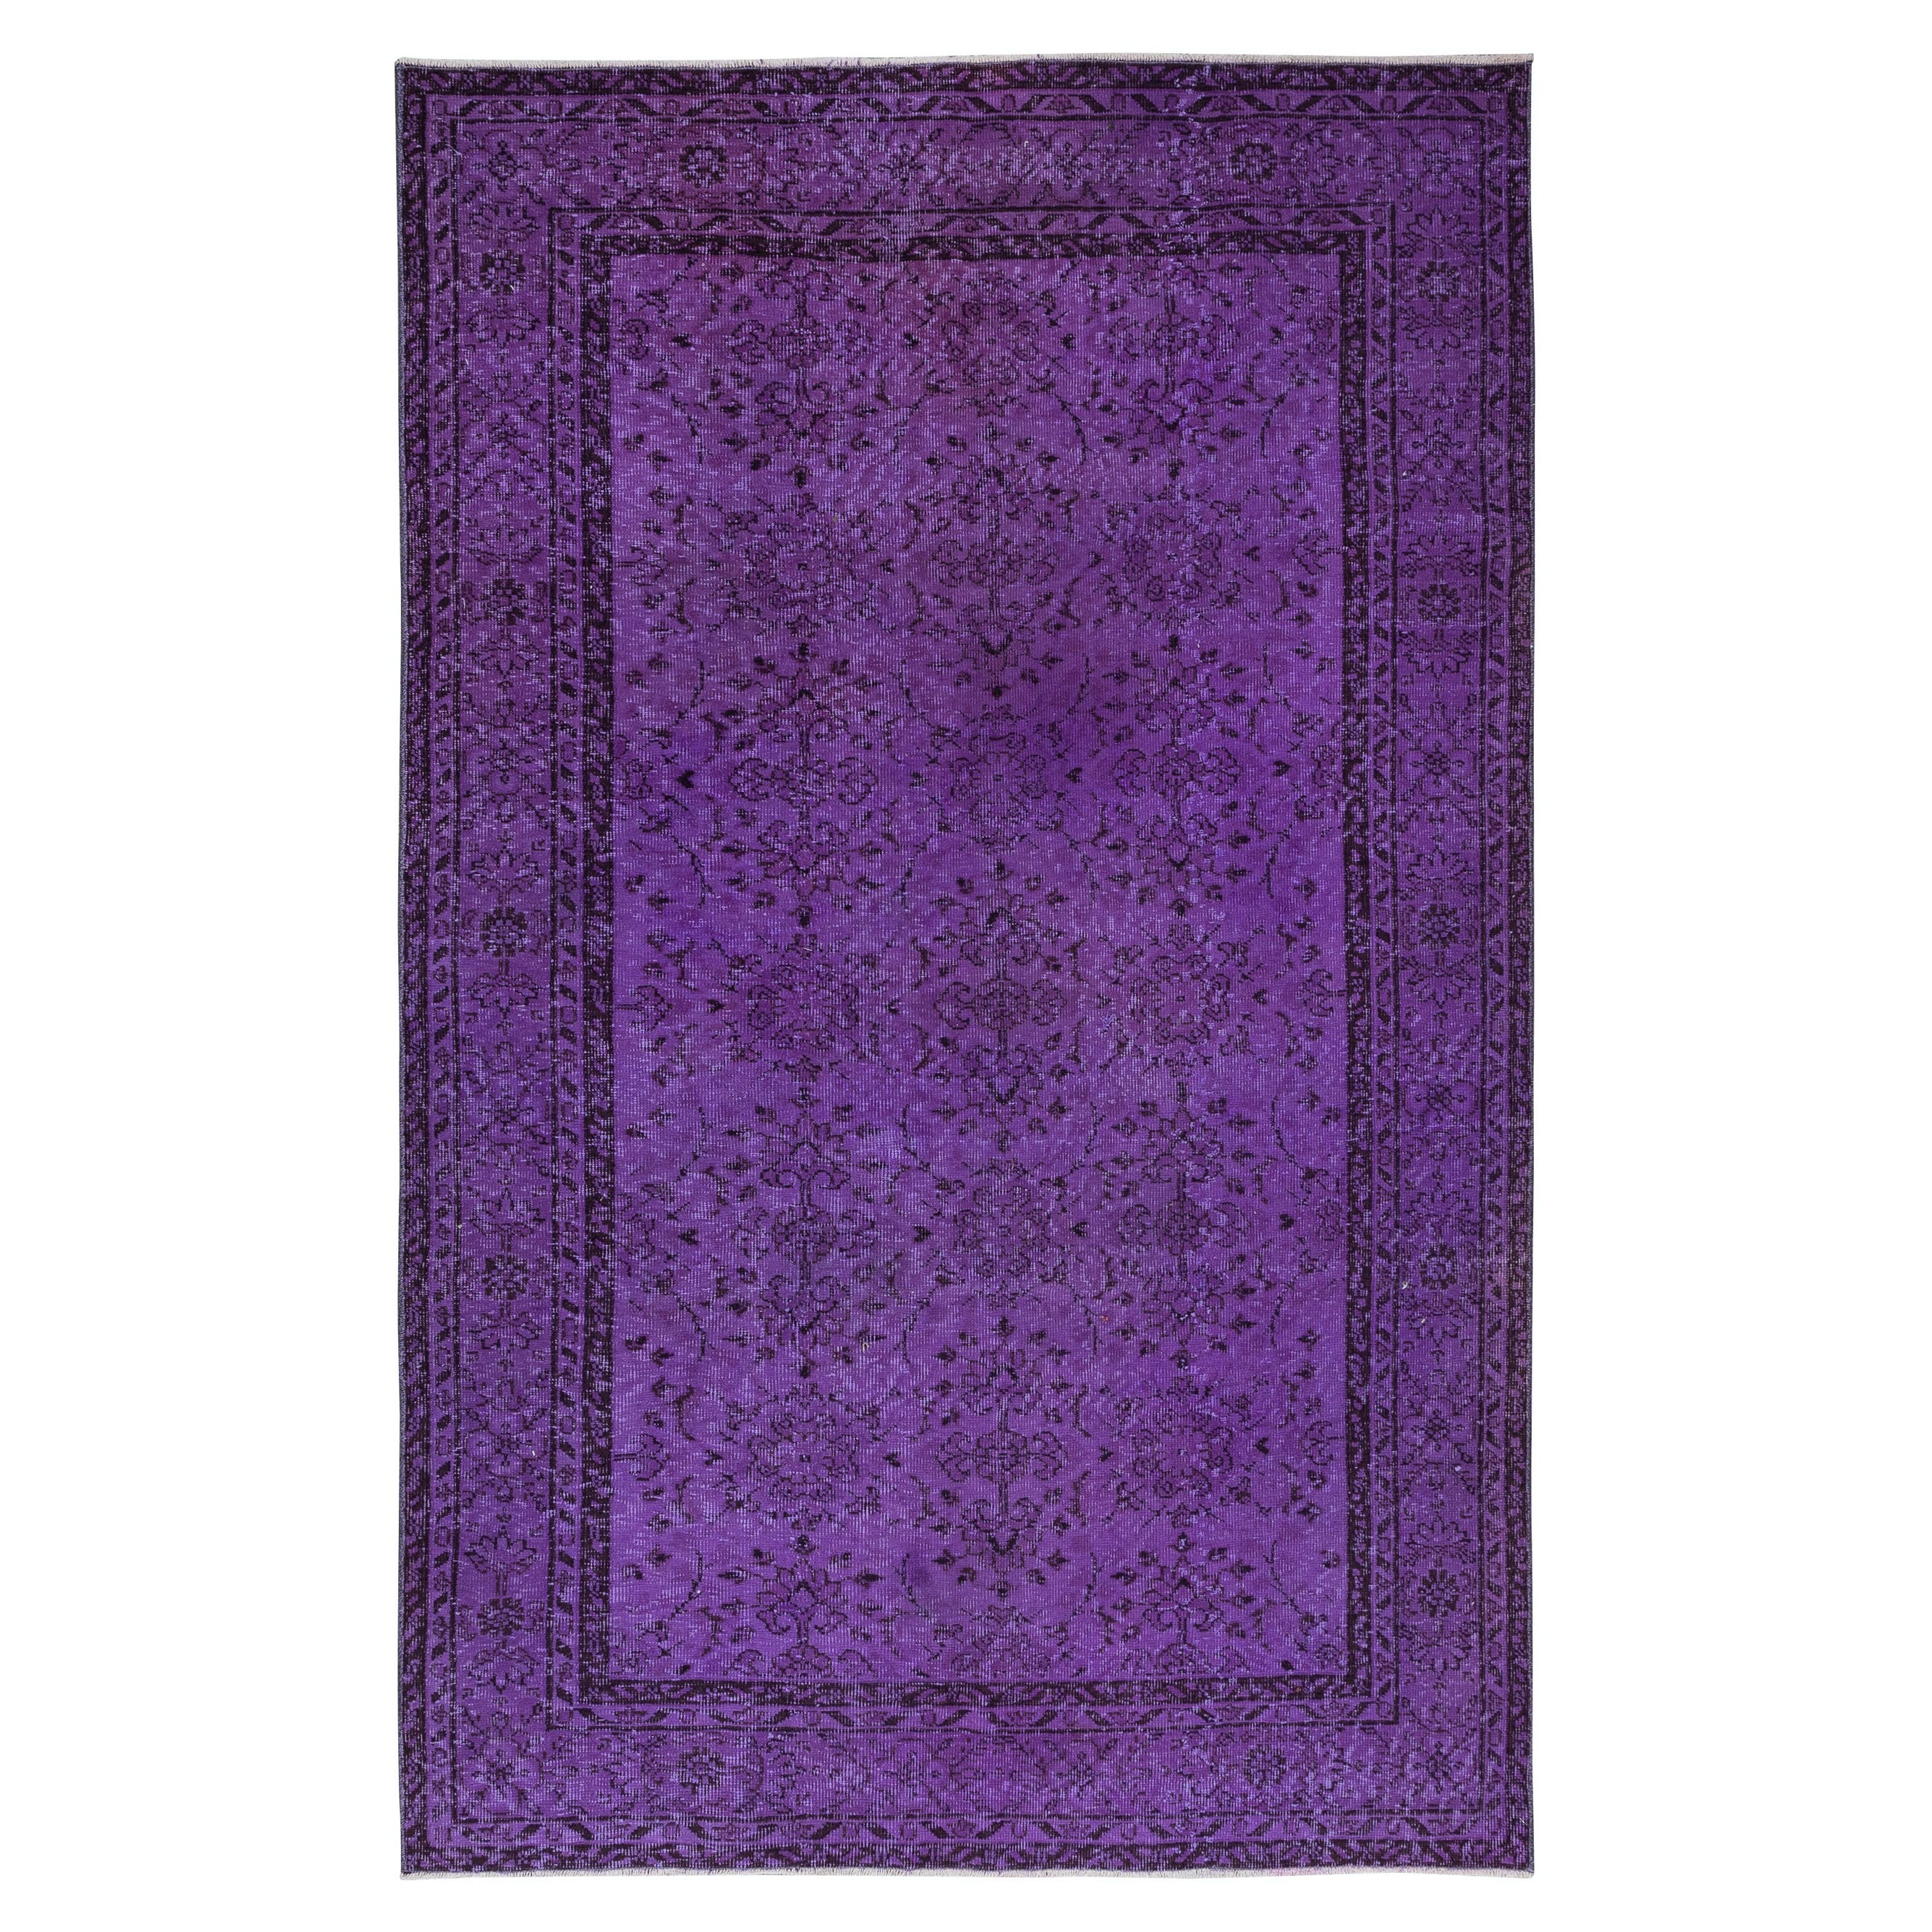 5.6x8.6 Ft Modern Hand Knotted Violet Purple Area Rug from Isparta, Turkey For Sale